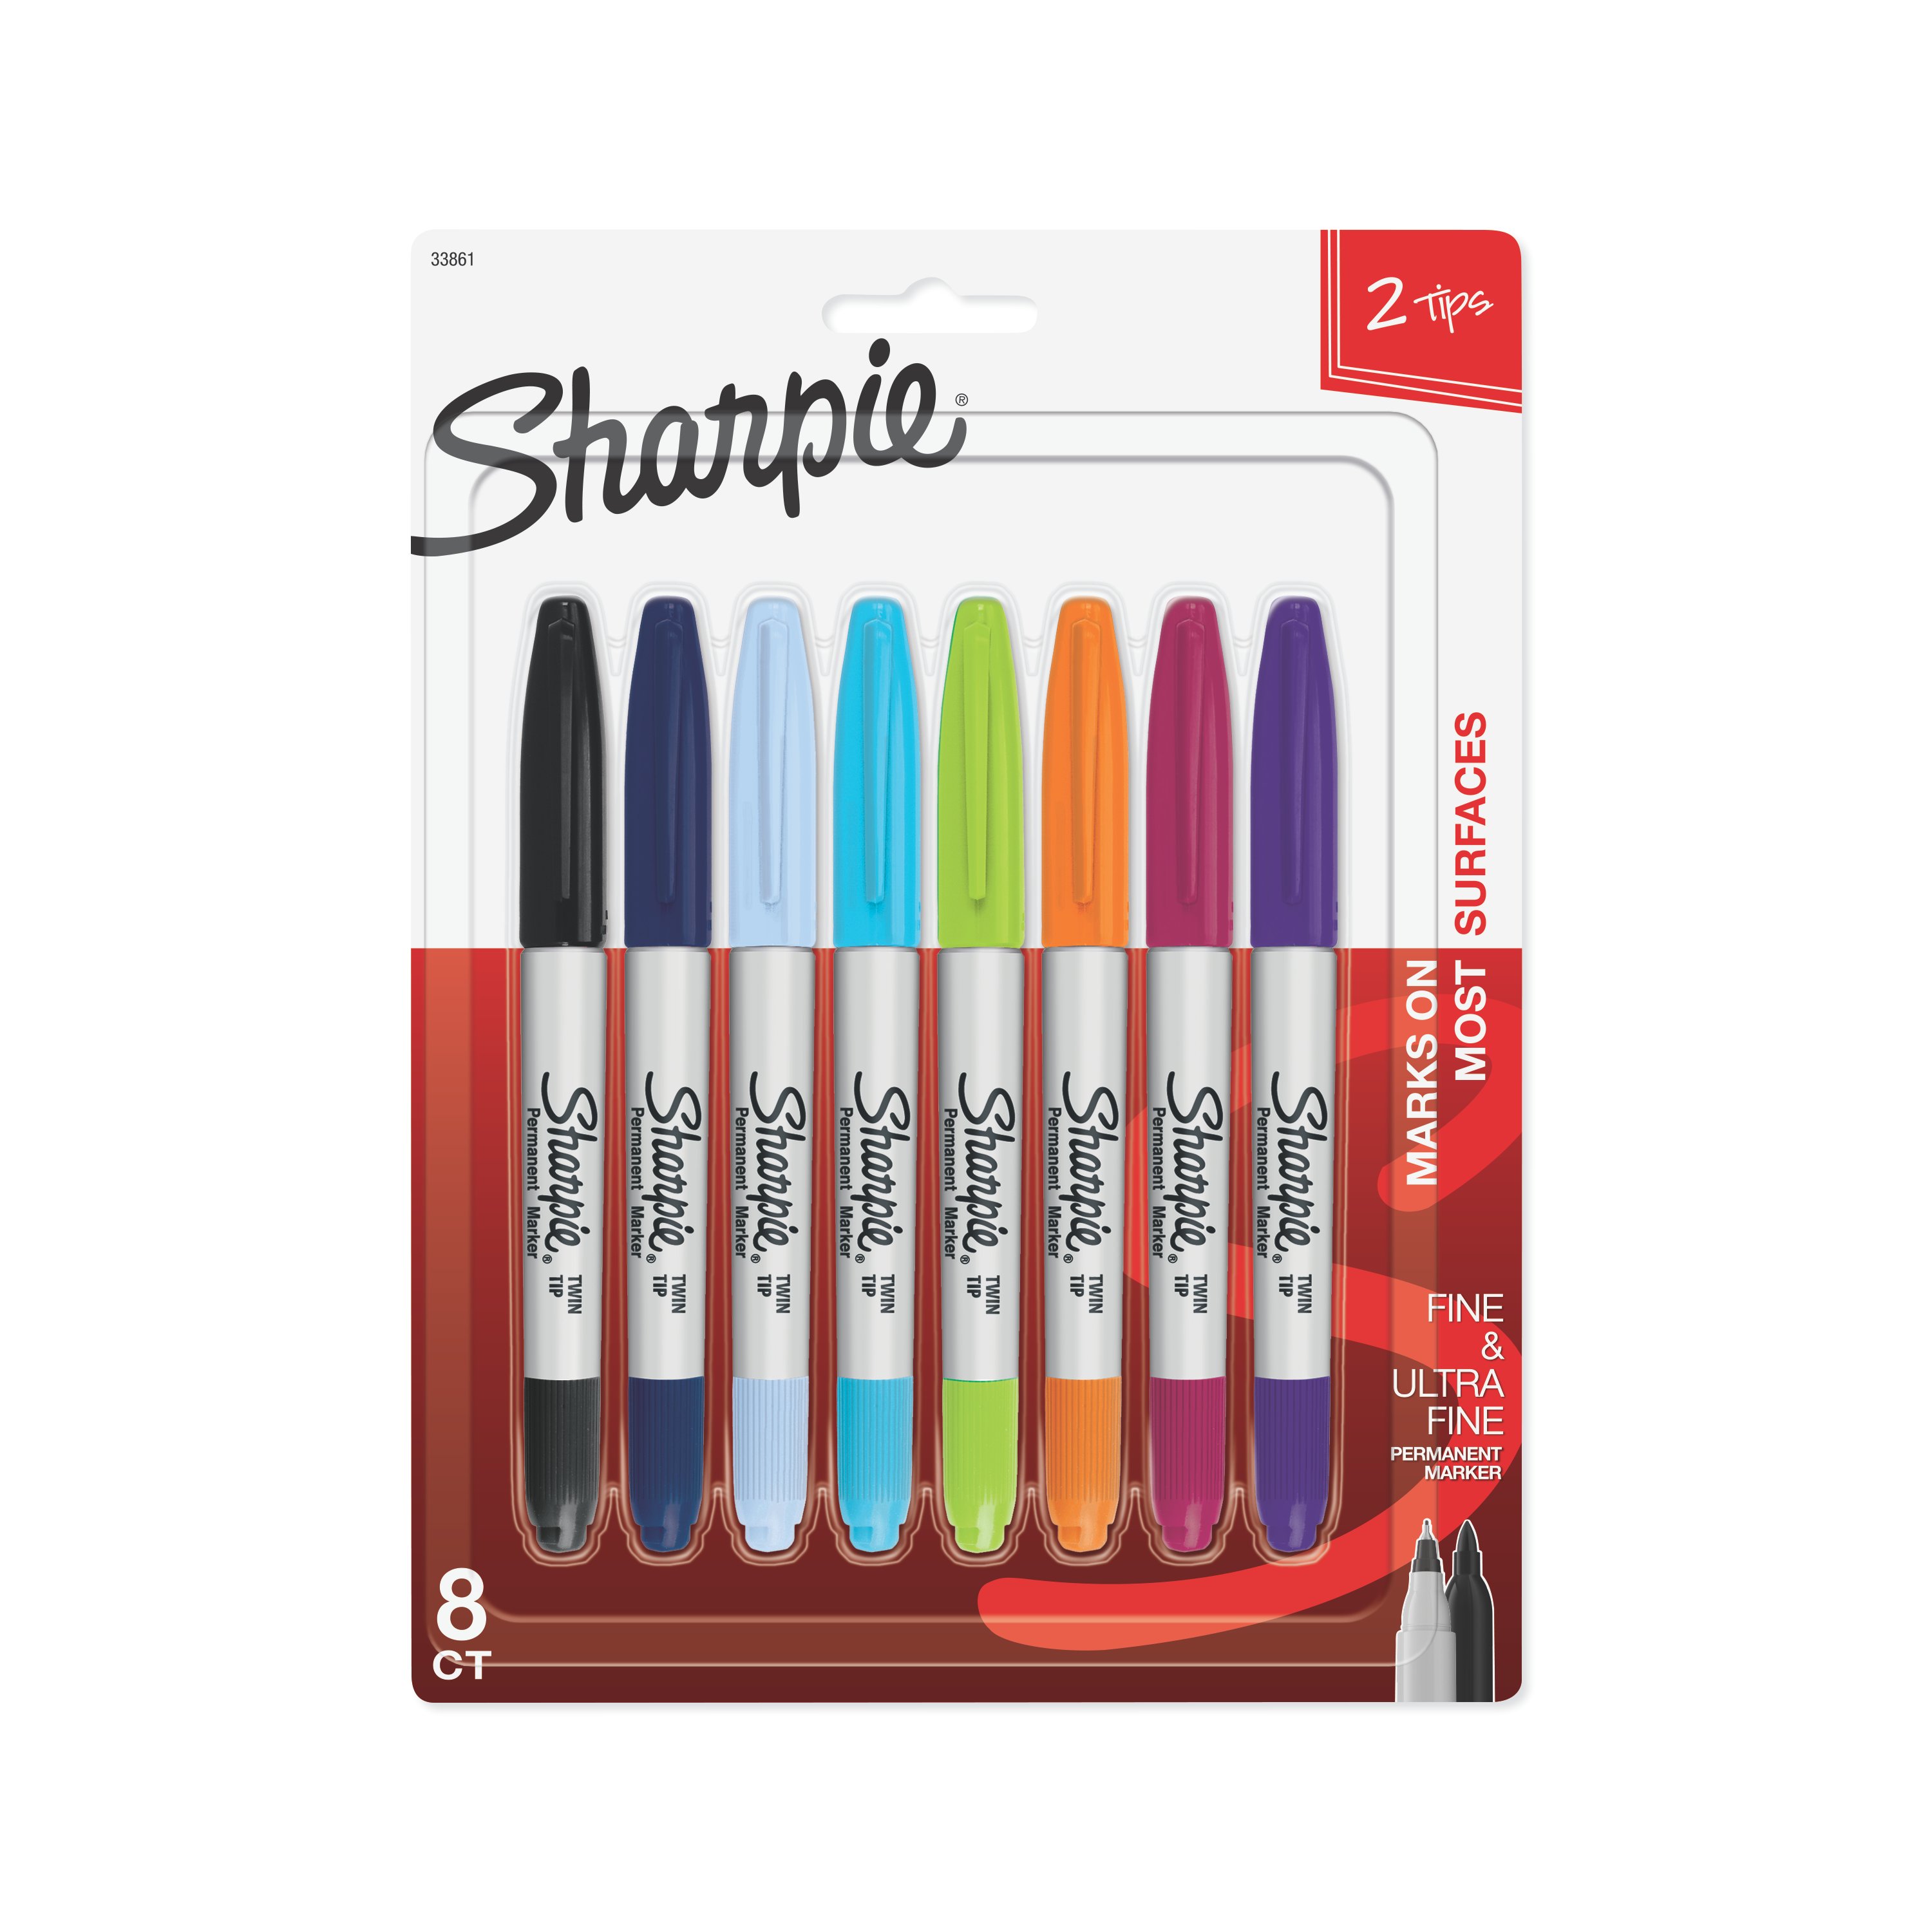 Any ideas on how to organize my Sharpies? I've been using the